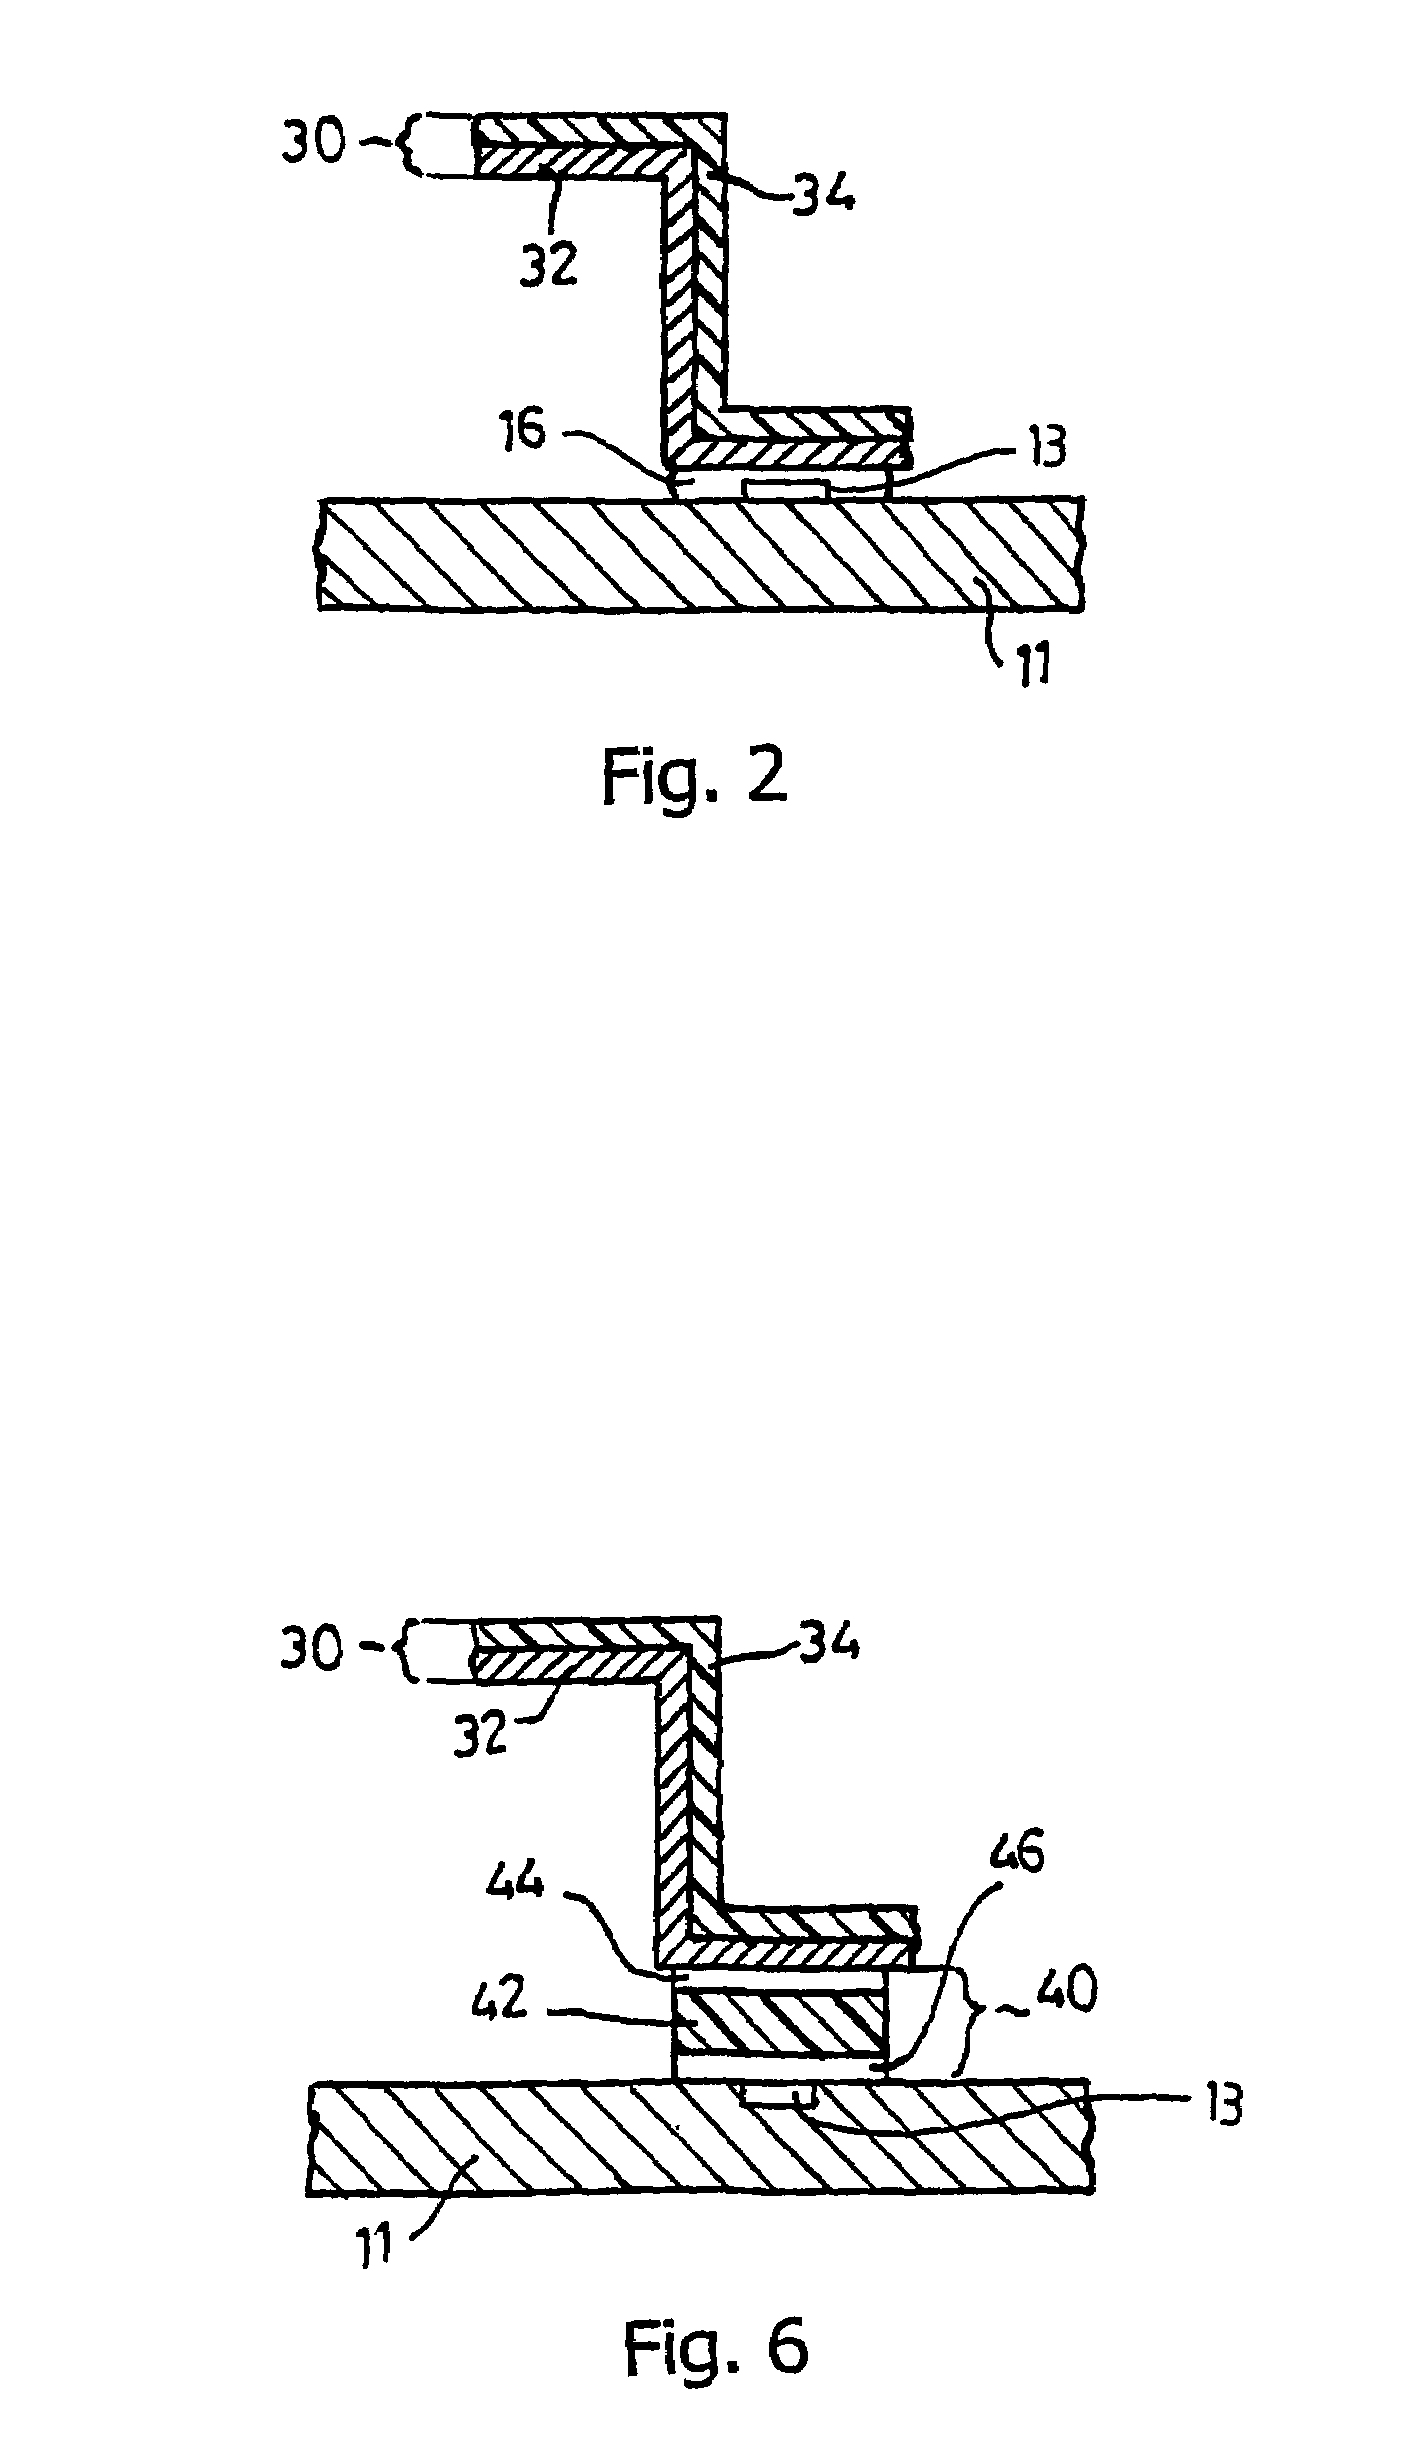 Methods of manufacturing a printed circuit board shielded against interfering radiation